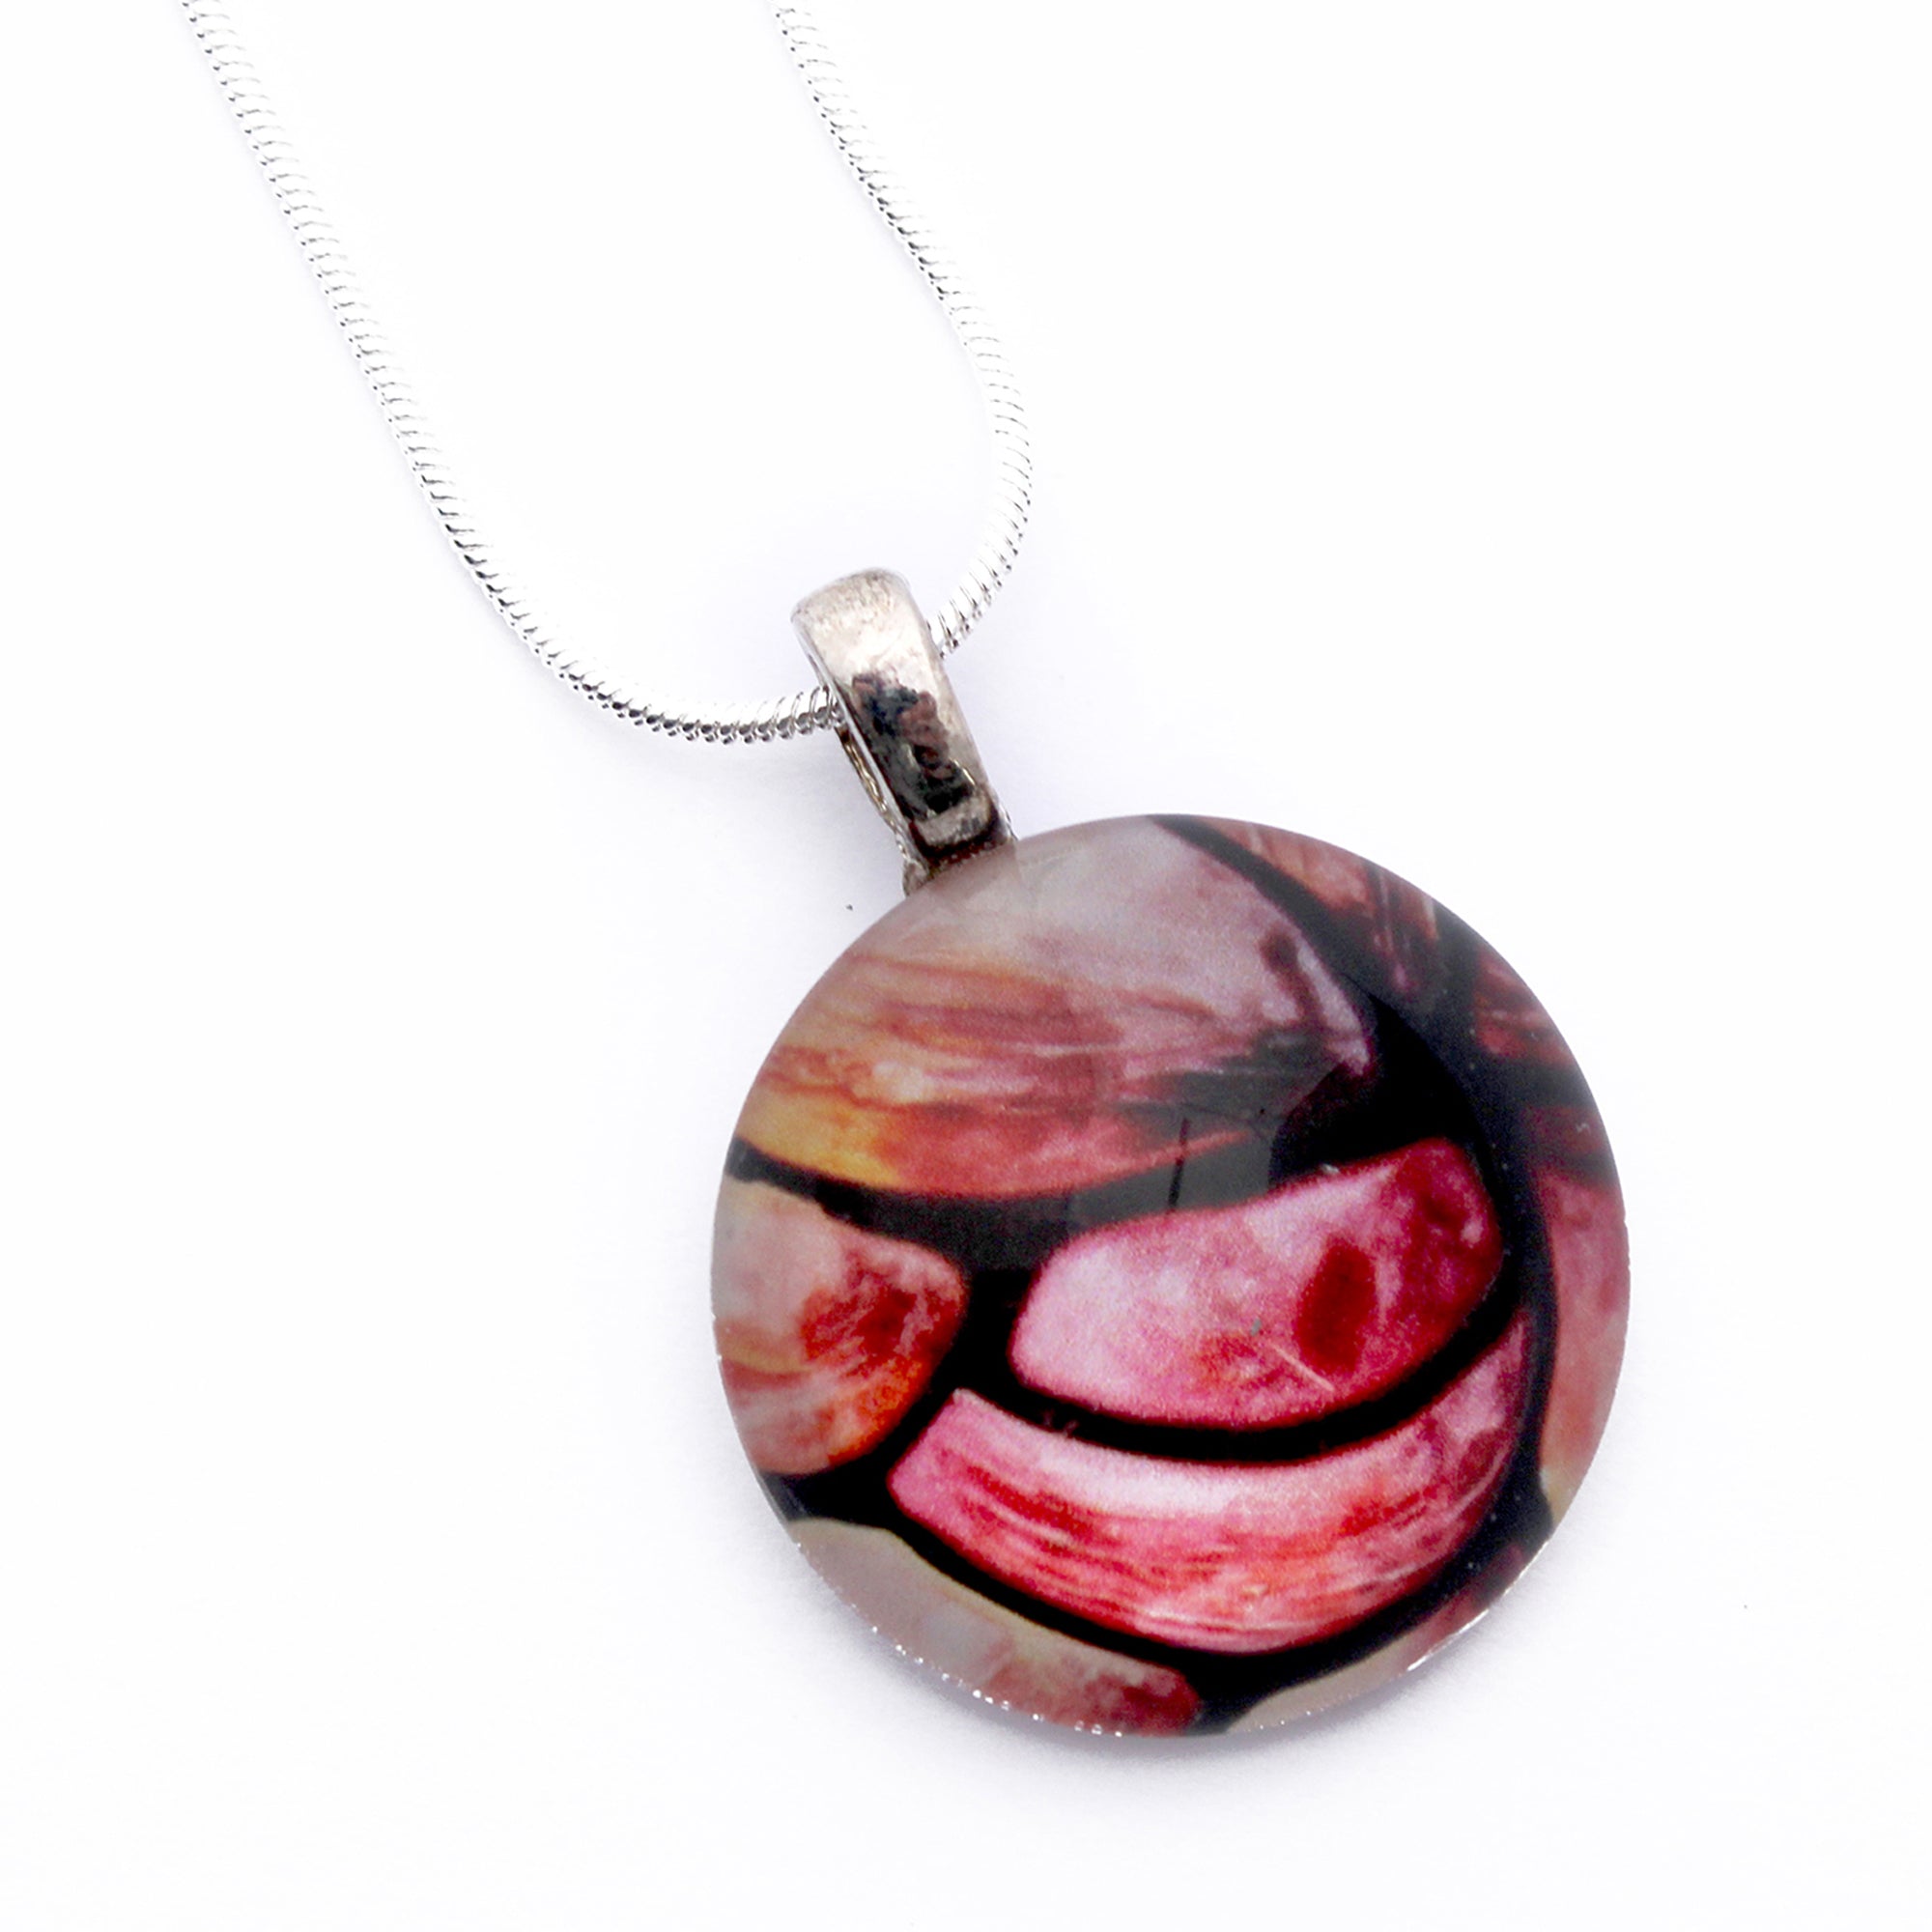 50% Off - Abstract Flower Petals Dome Necklace